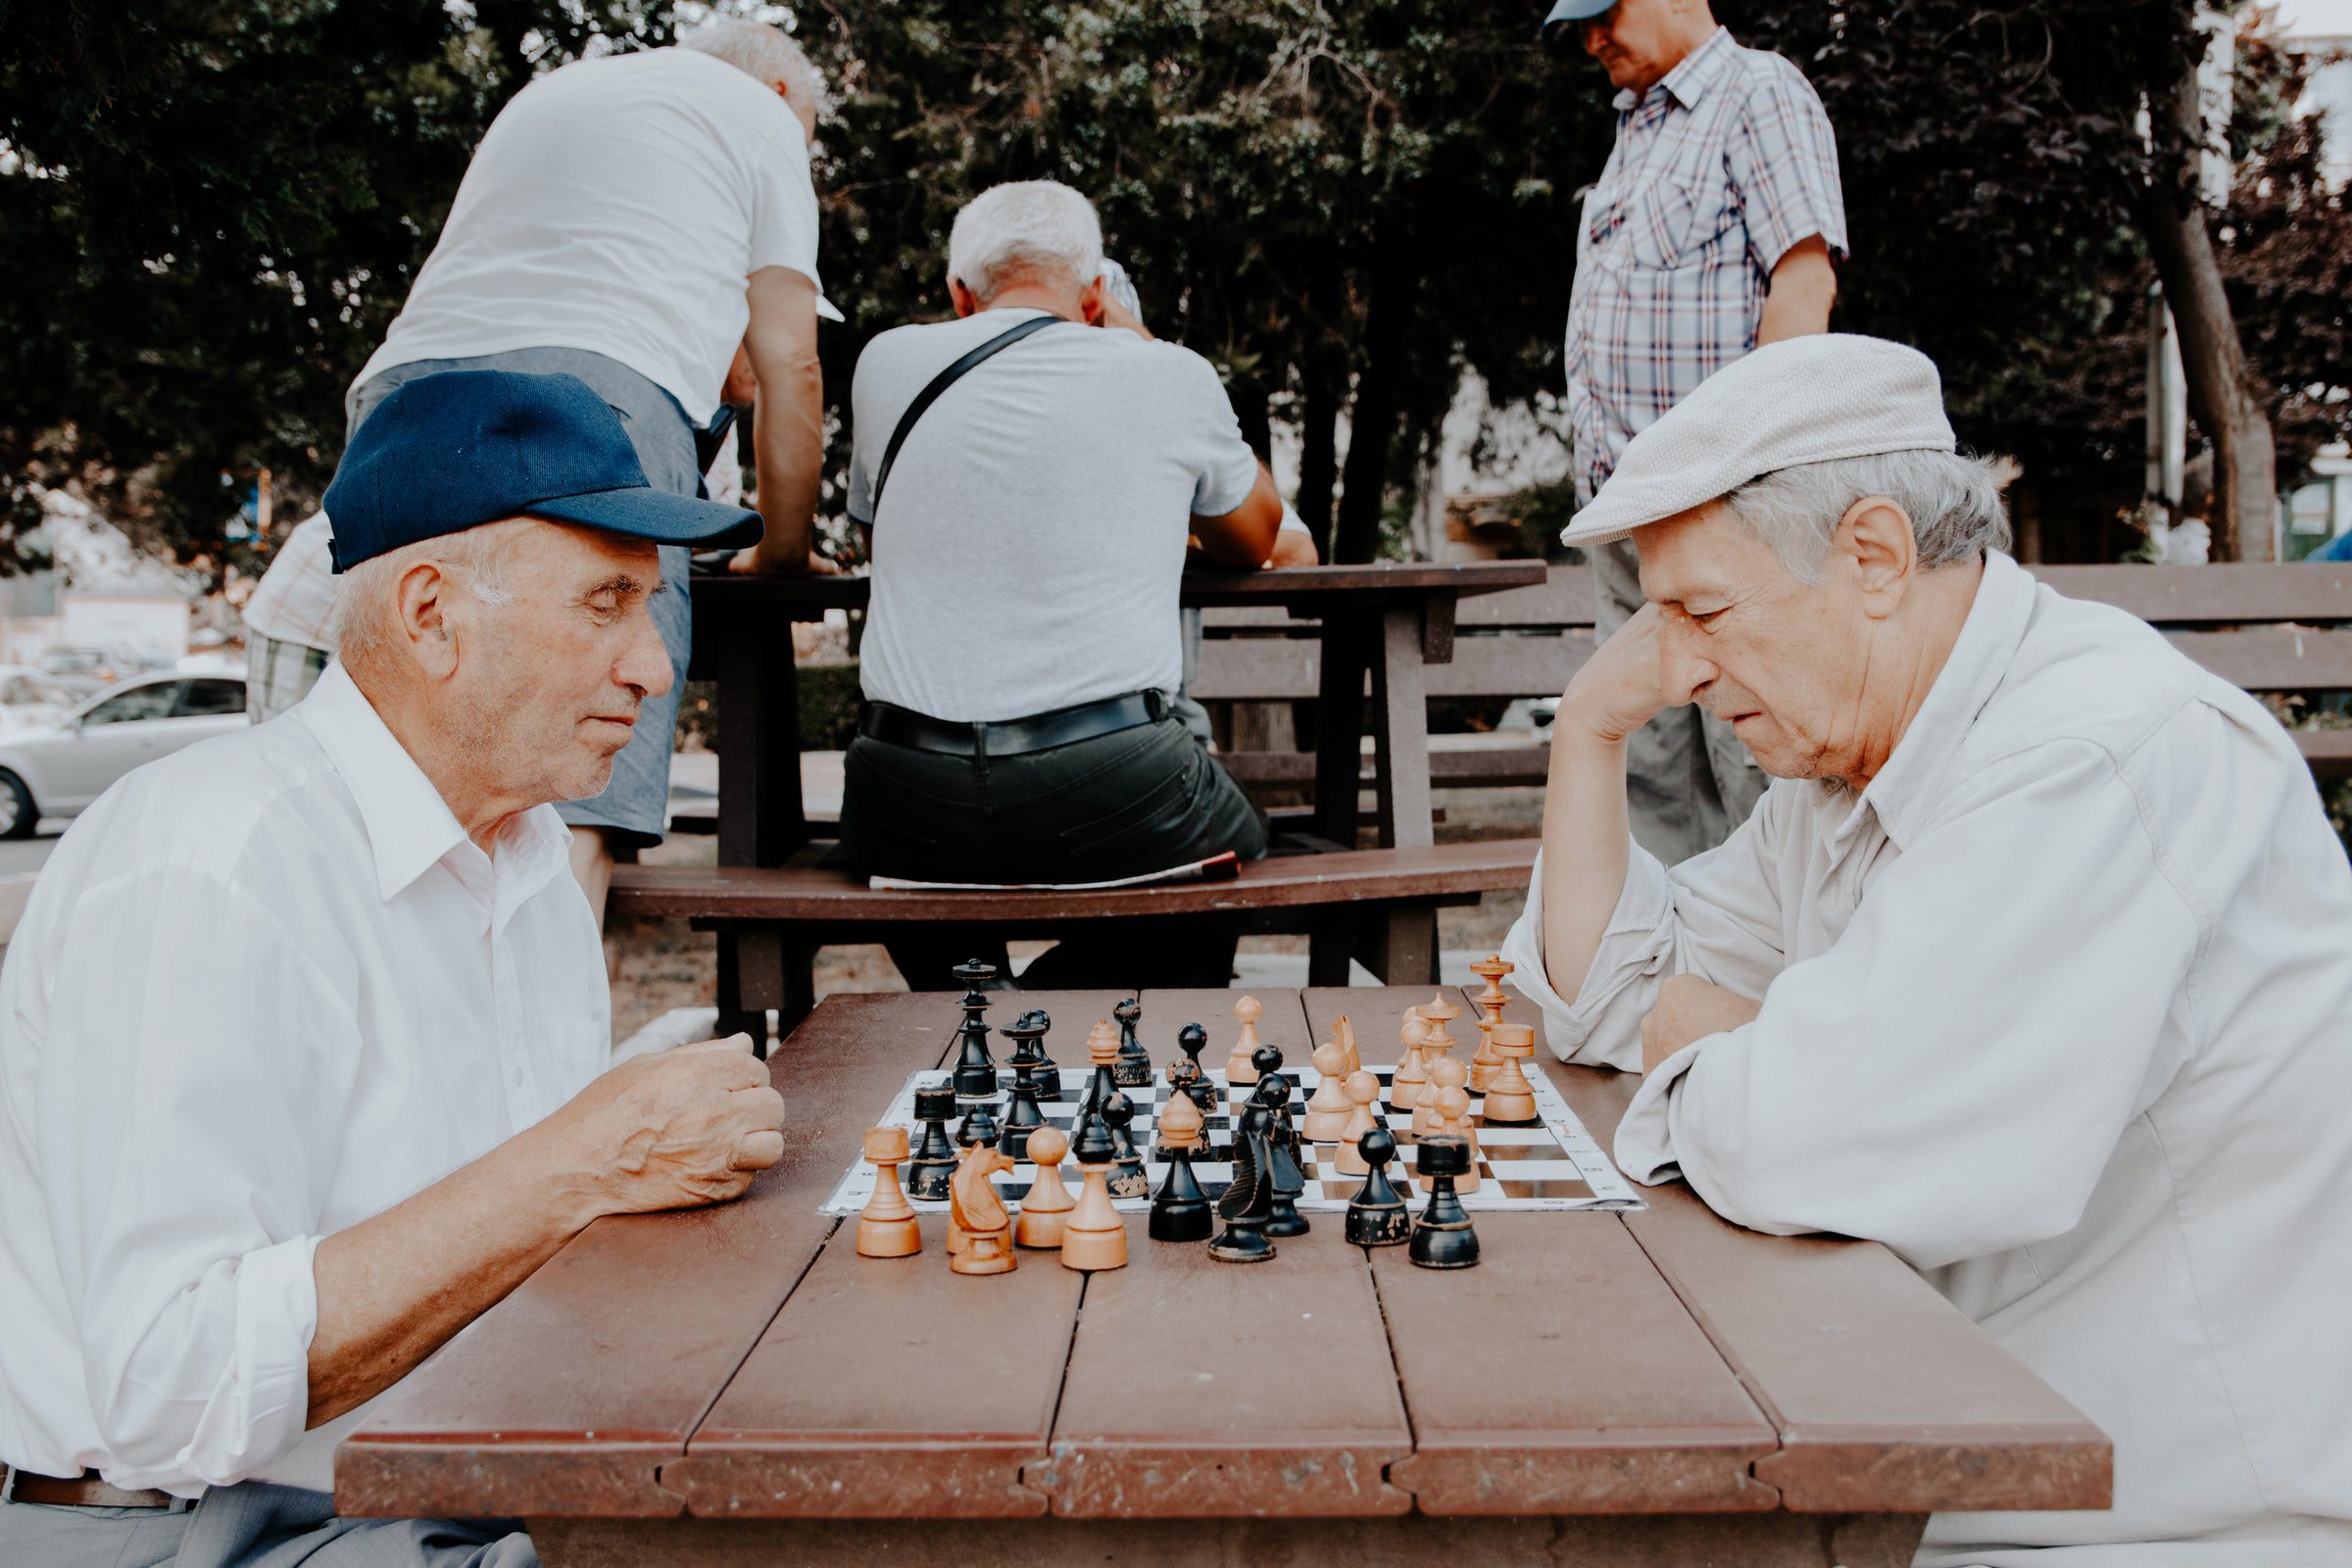 Older Gentlemen playing chess in the Park